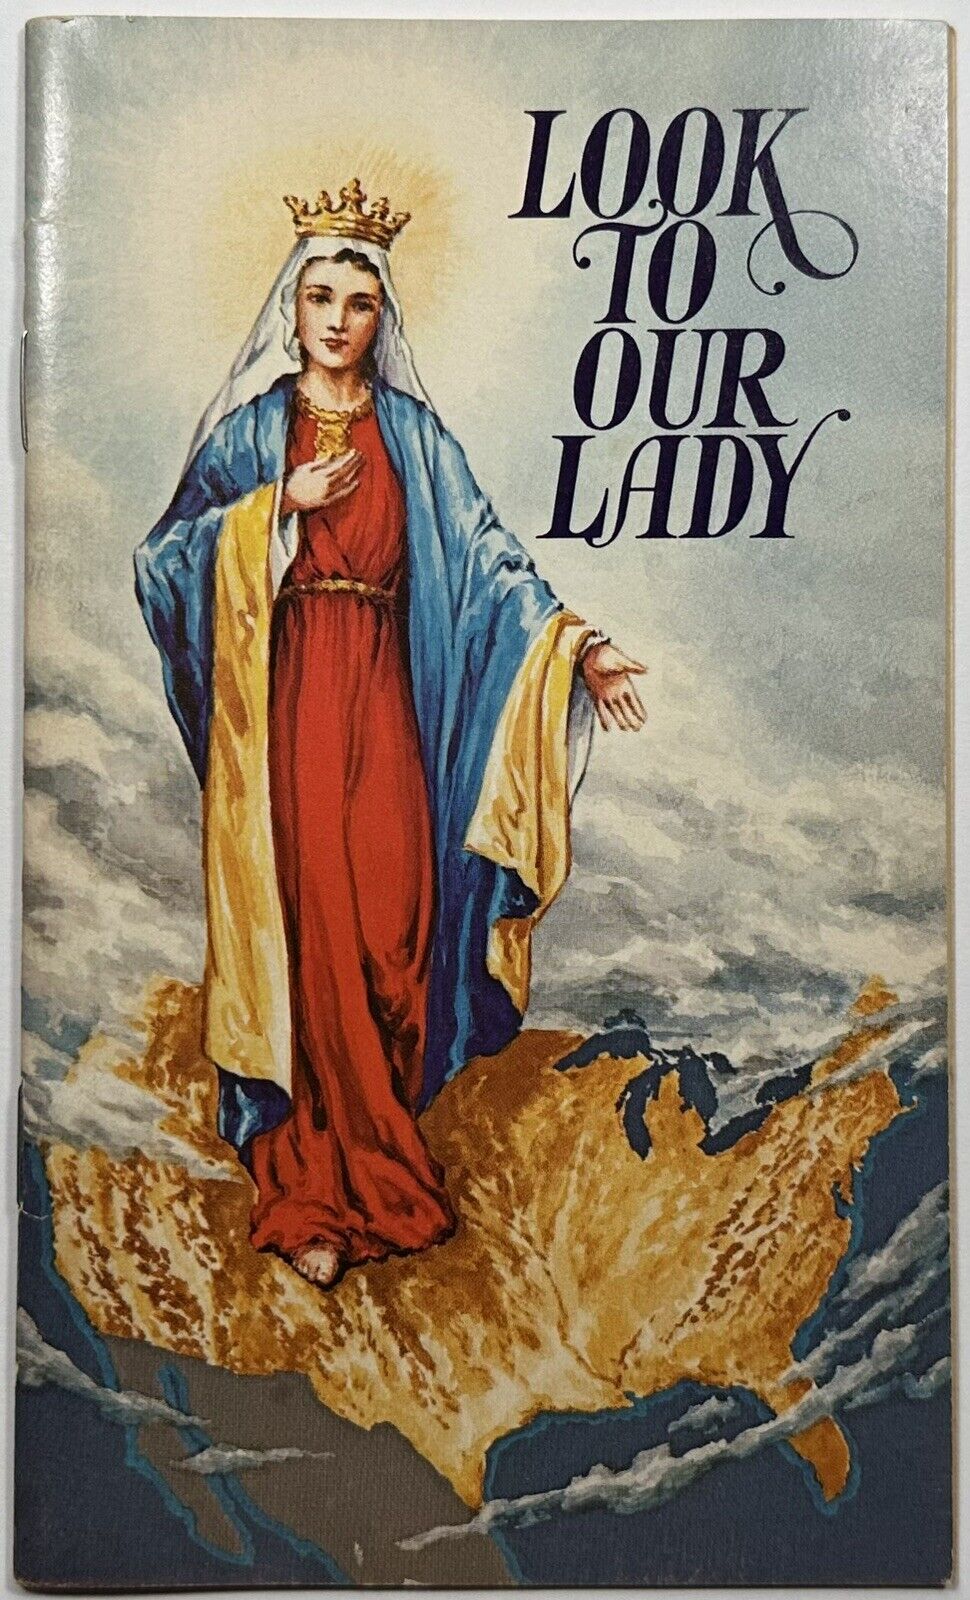 Look to Our Lady, Vintage 1974 Holy Devotional Booklet.